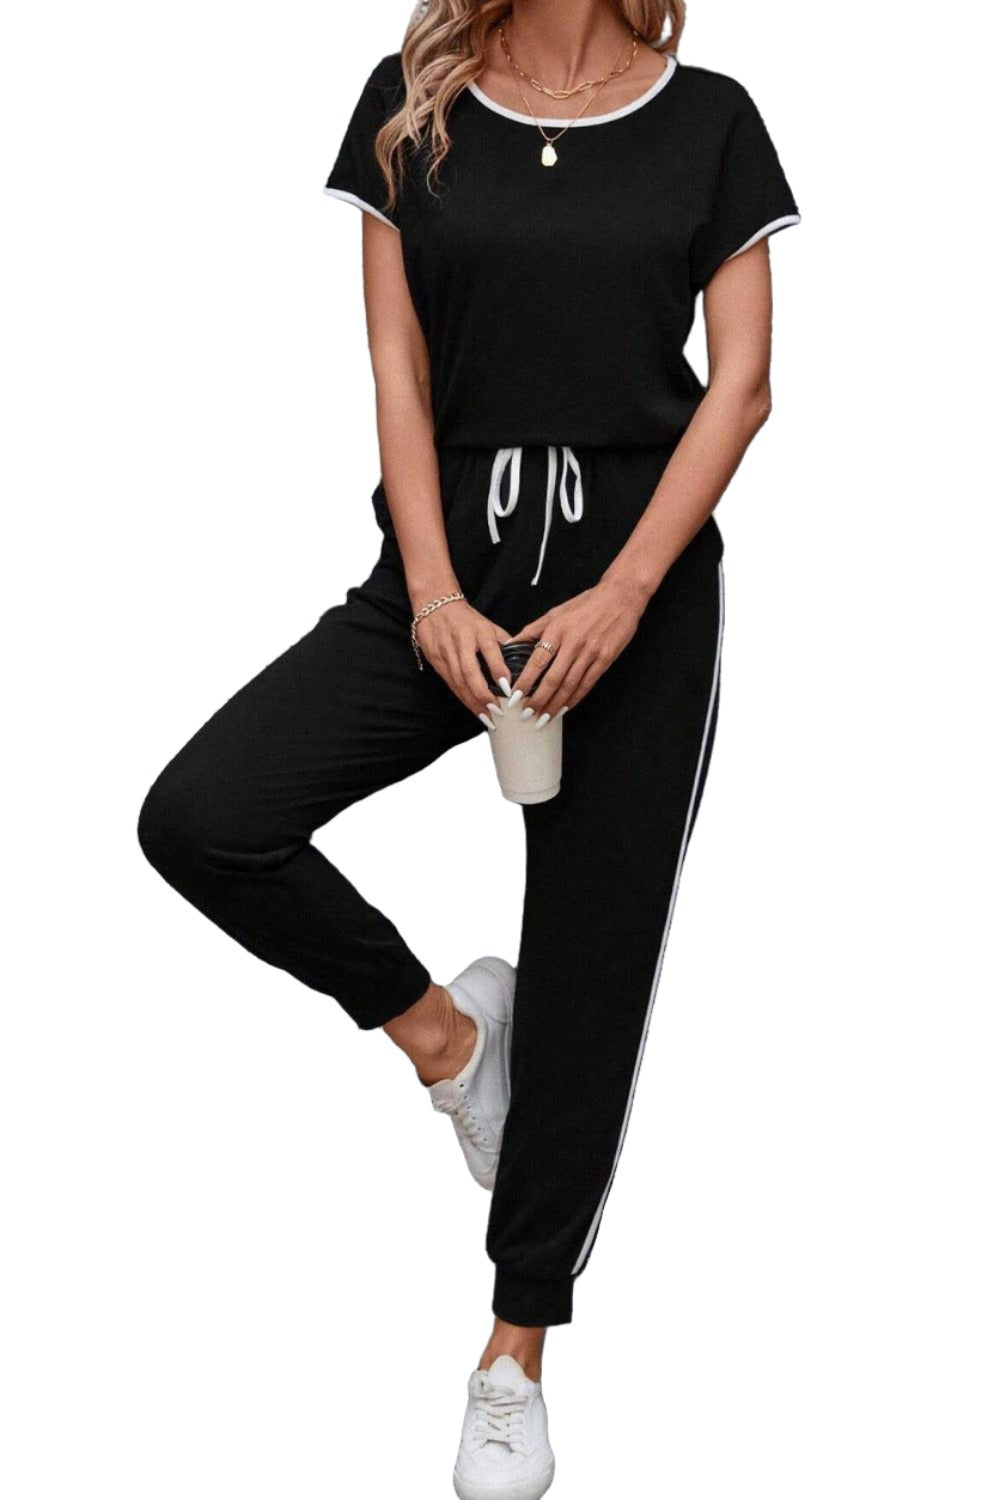 Women's Outfits & Sets Contrast Trim Round Neck Top and Pants Set